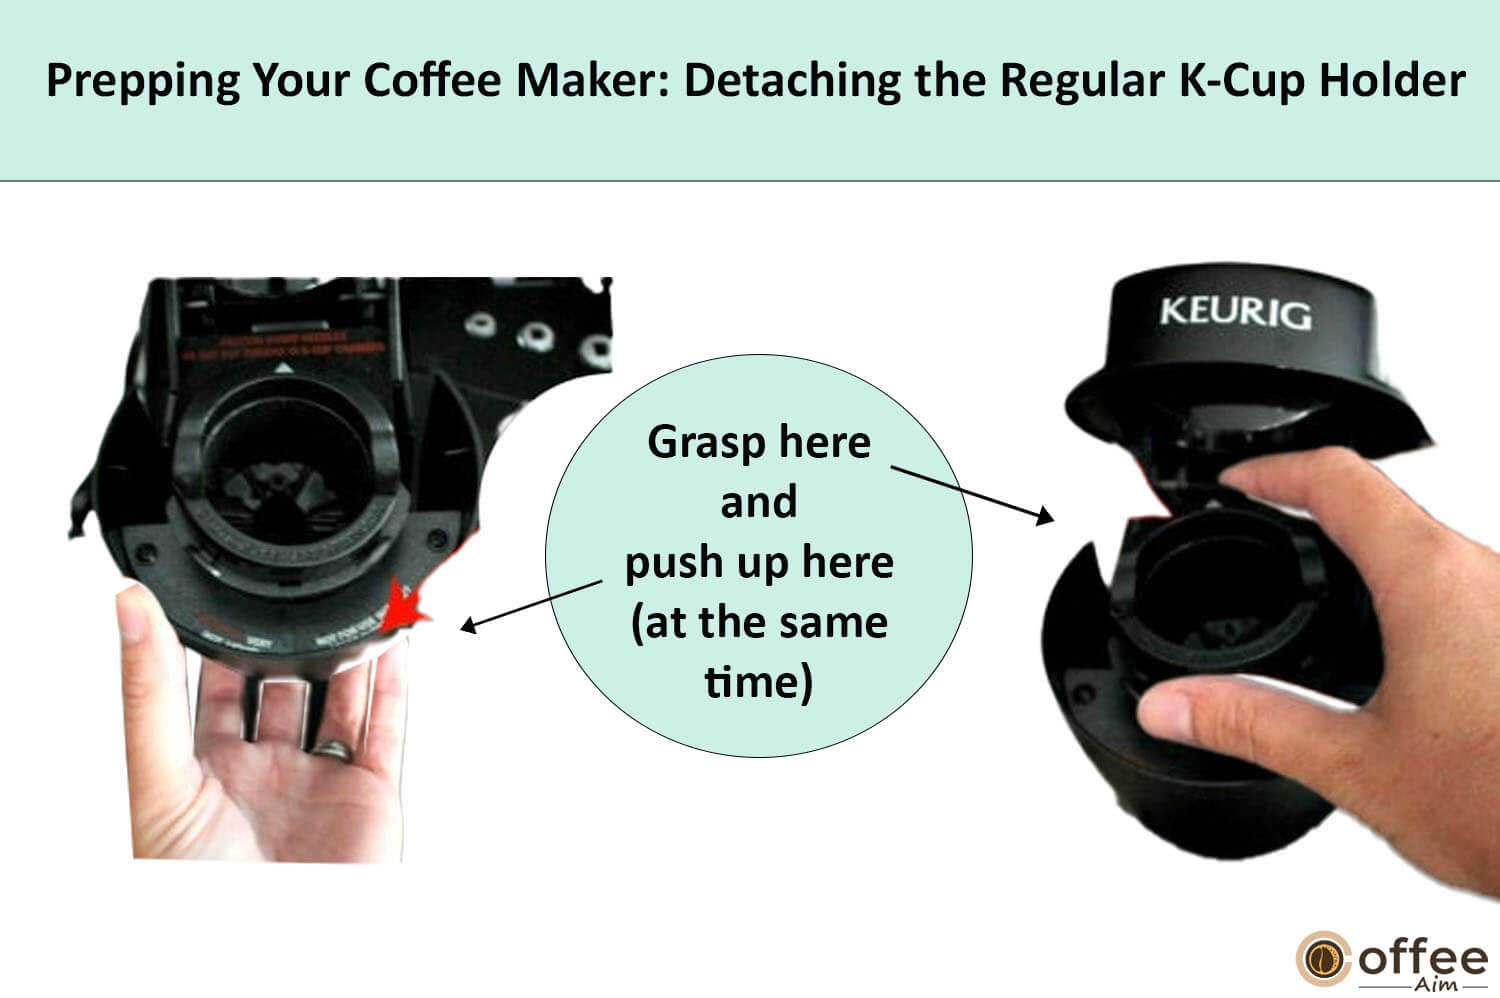 In this image, I elucidate the how to remove the regular k cup holder.